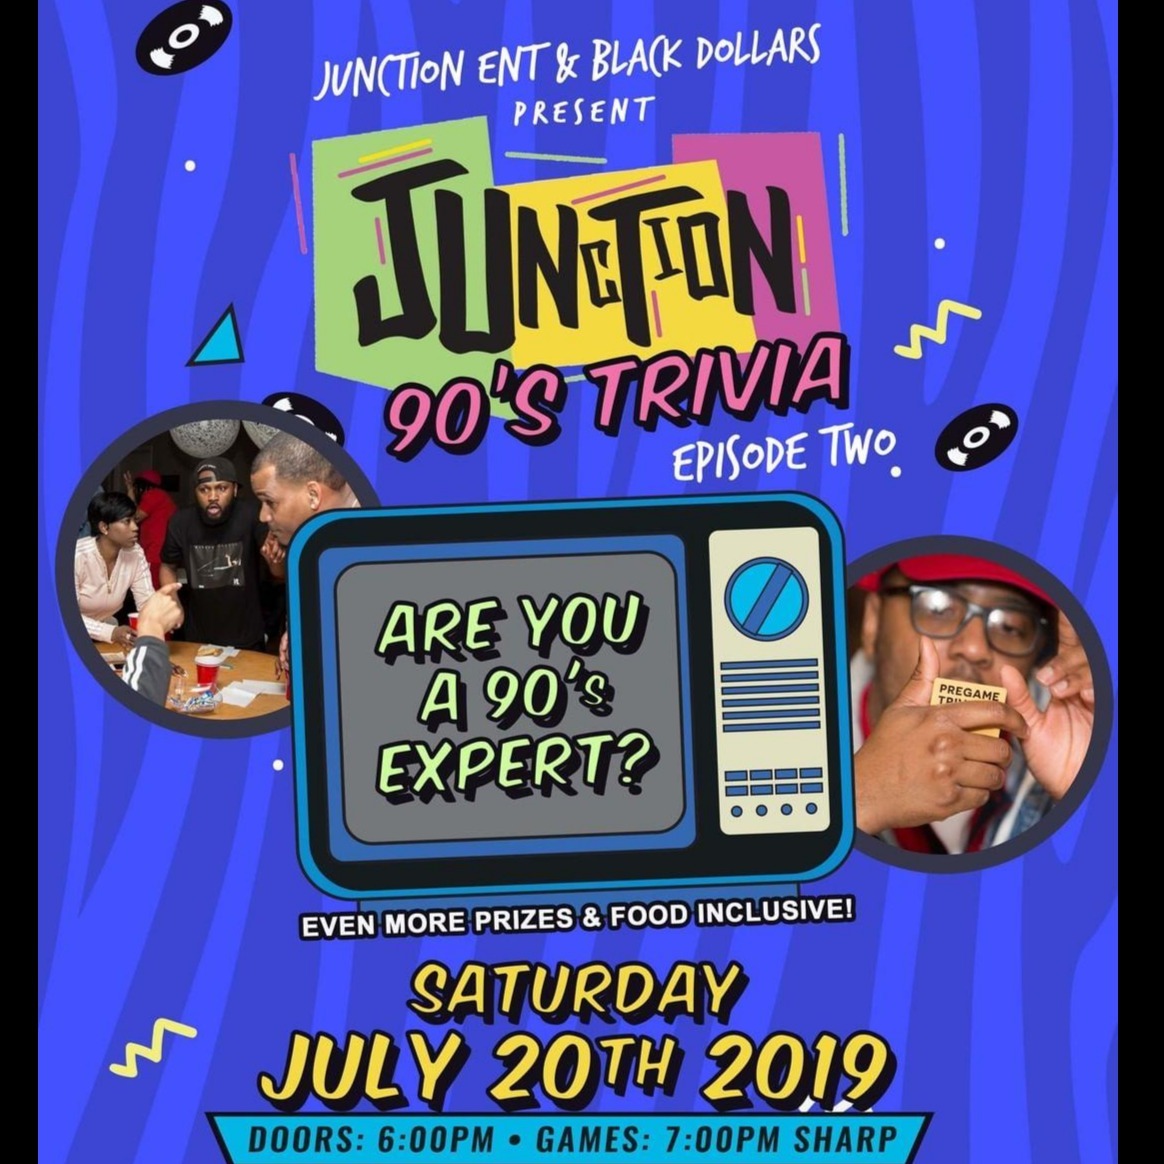 JUNCTION PRESENTS: 90'S TRIVIA GAME NIGHT! Episode #2